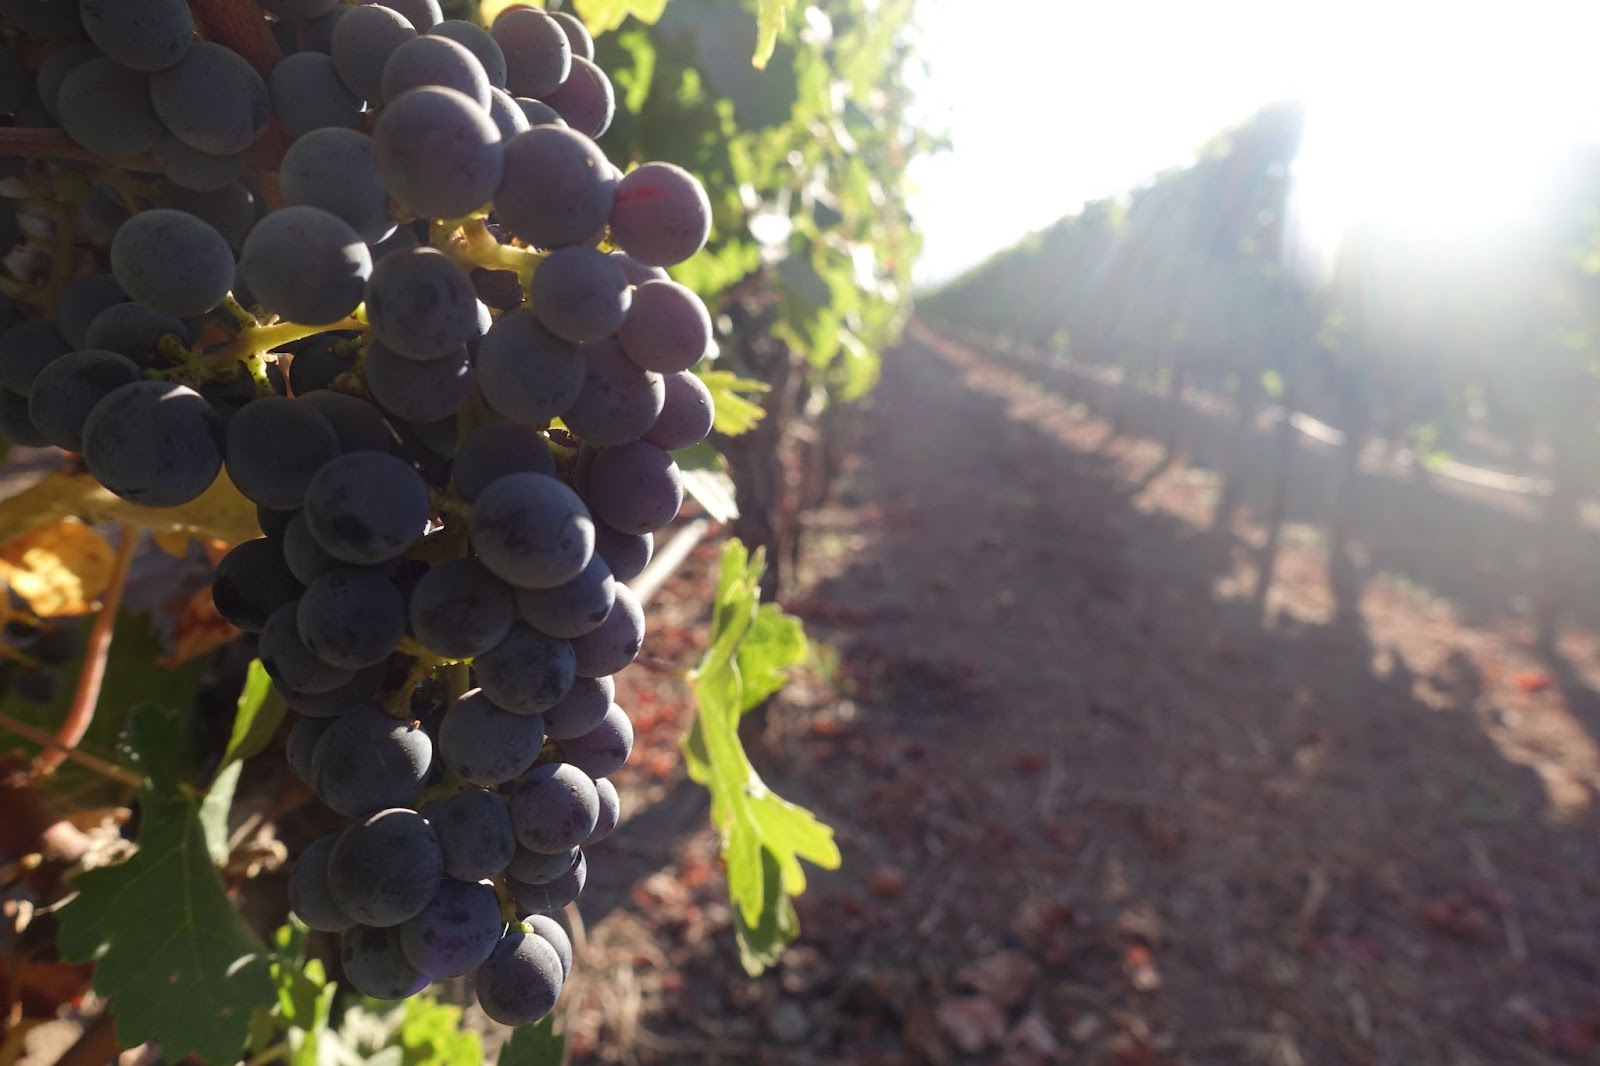 Healthy wine grapes in a vineyard.